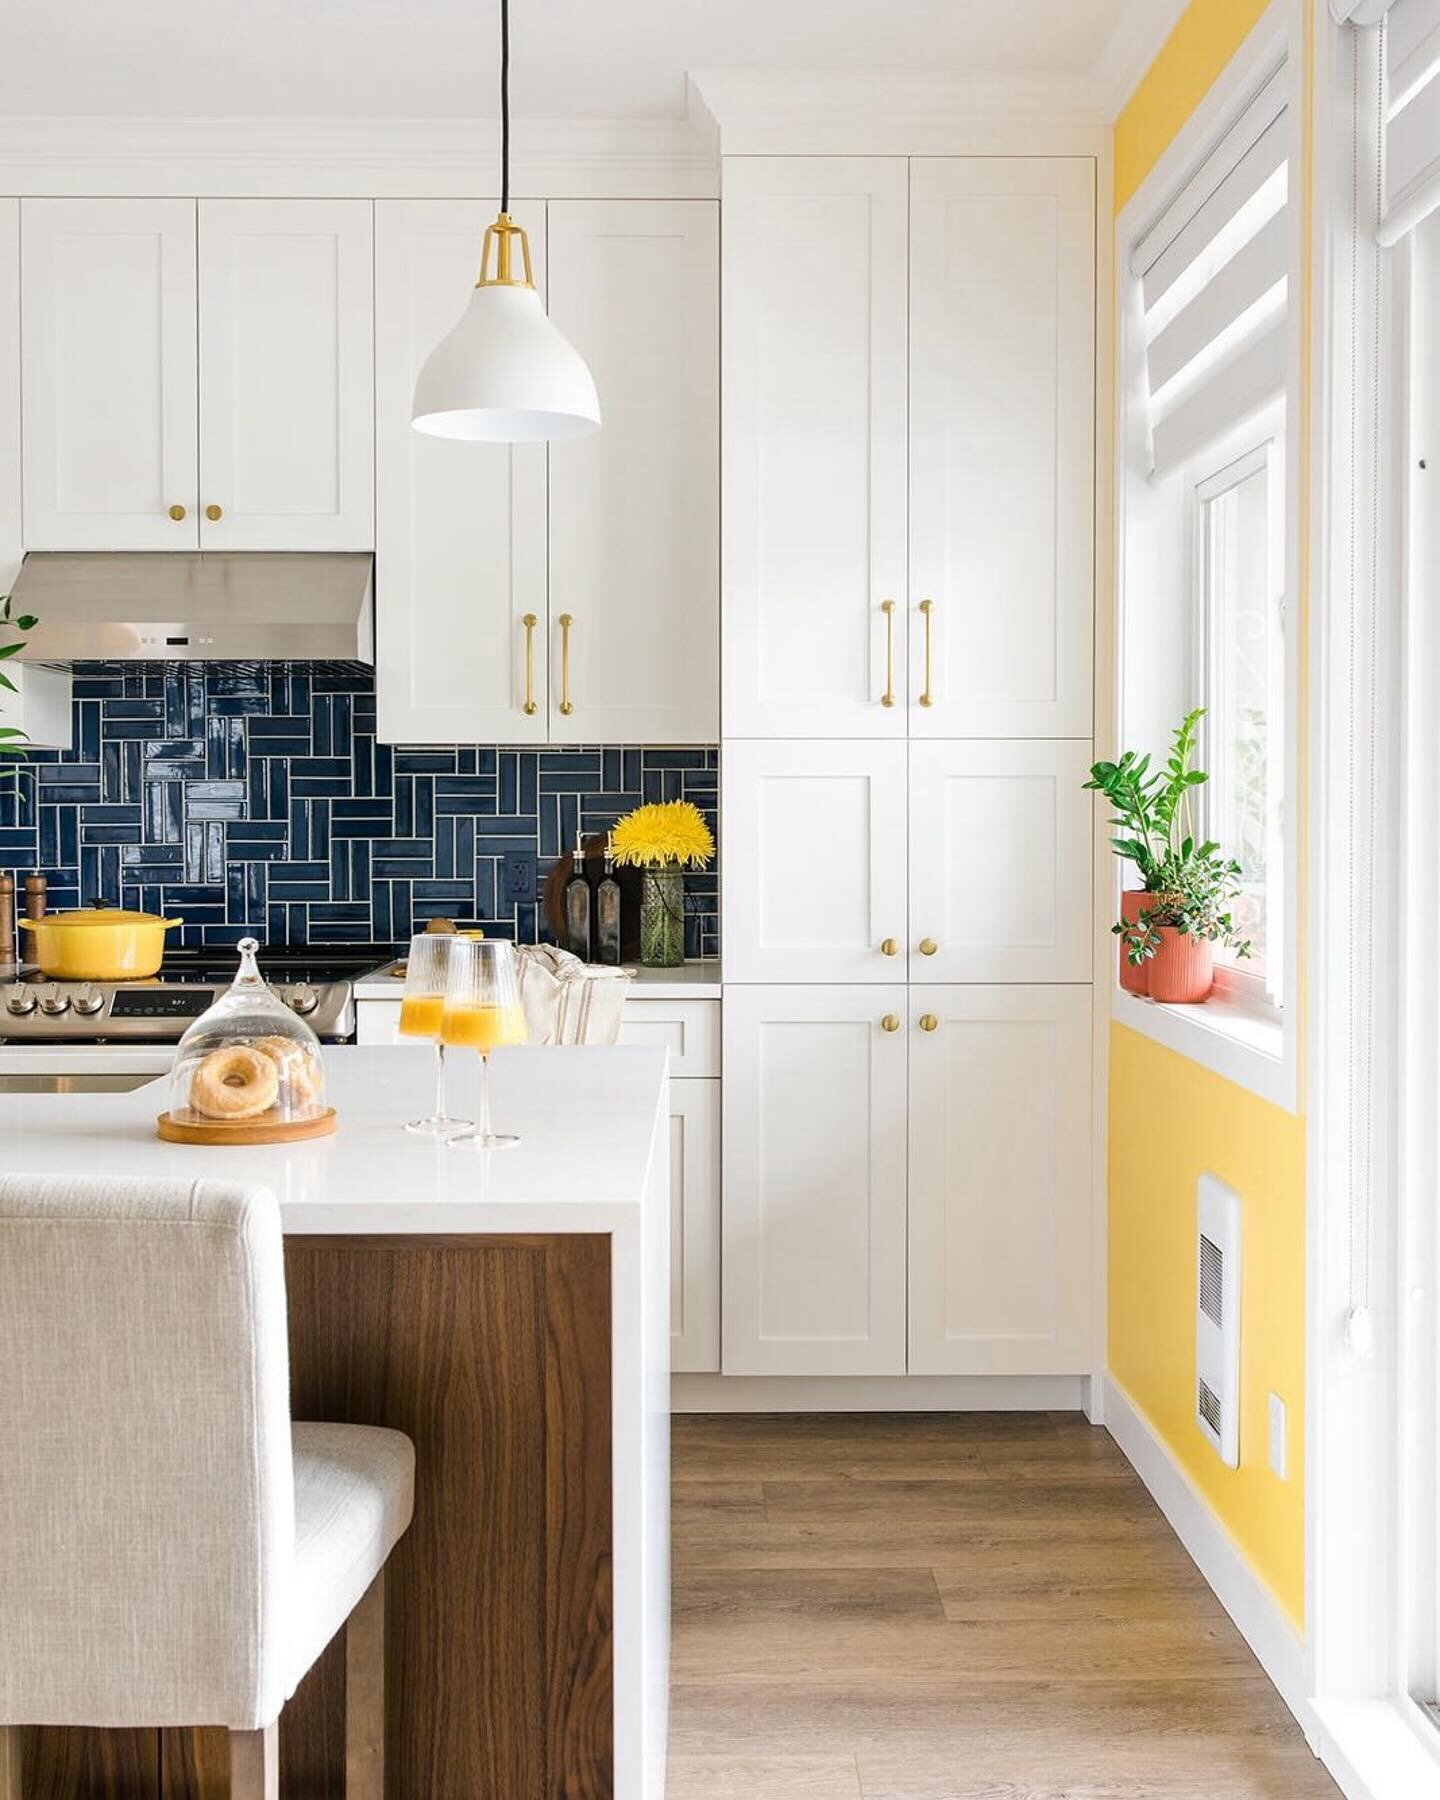 Capturing the essence of @dinnissendesignco 's &ldquo;Not so Typical&rdquo; west coast kitchen 👆Where sunshine yellow and seaside blue unite in the perfect palette! ☀️🌊 

As an interior designer, your visuals should speak loud 👉 so your design can